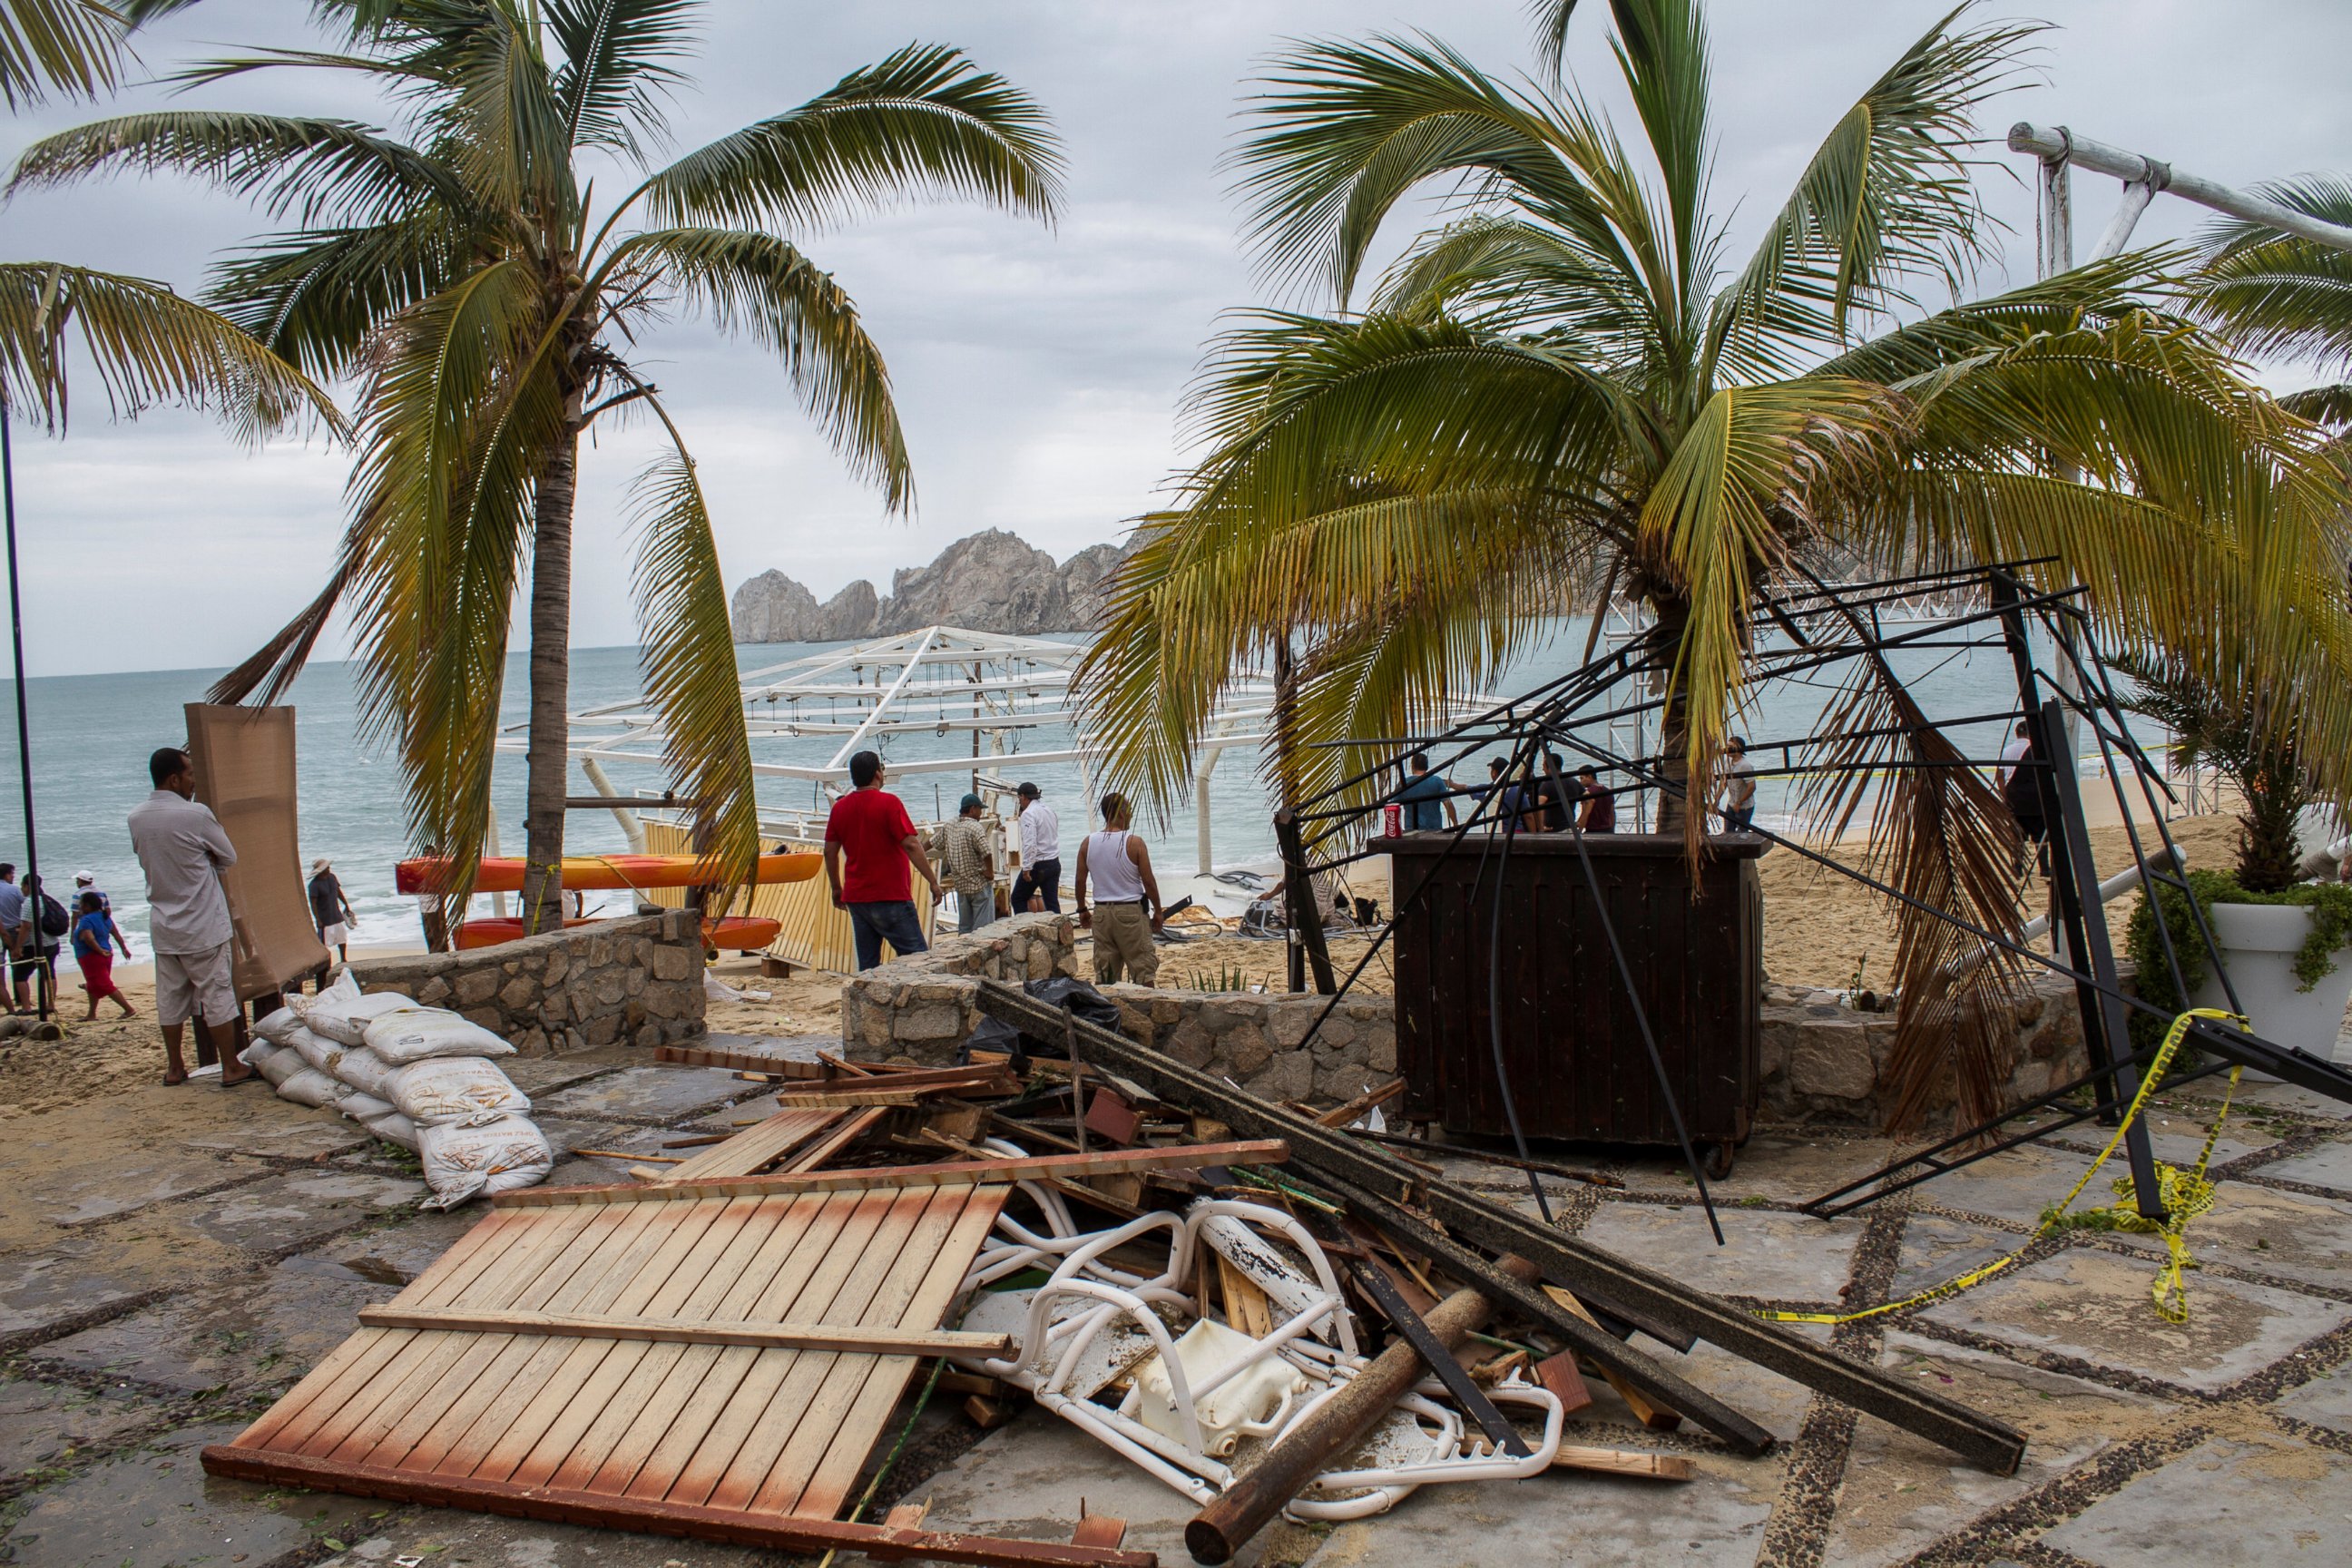 PHOTO: Residents stand next to debris of a restaurant in the aftermath of Hurricane Newton in Los Cabos, Mexico, Sept. 6, 2016.